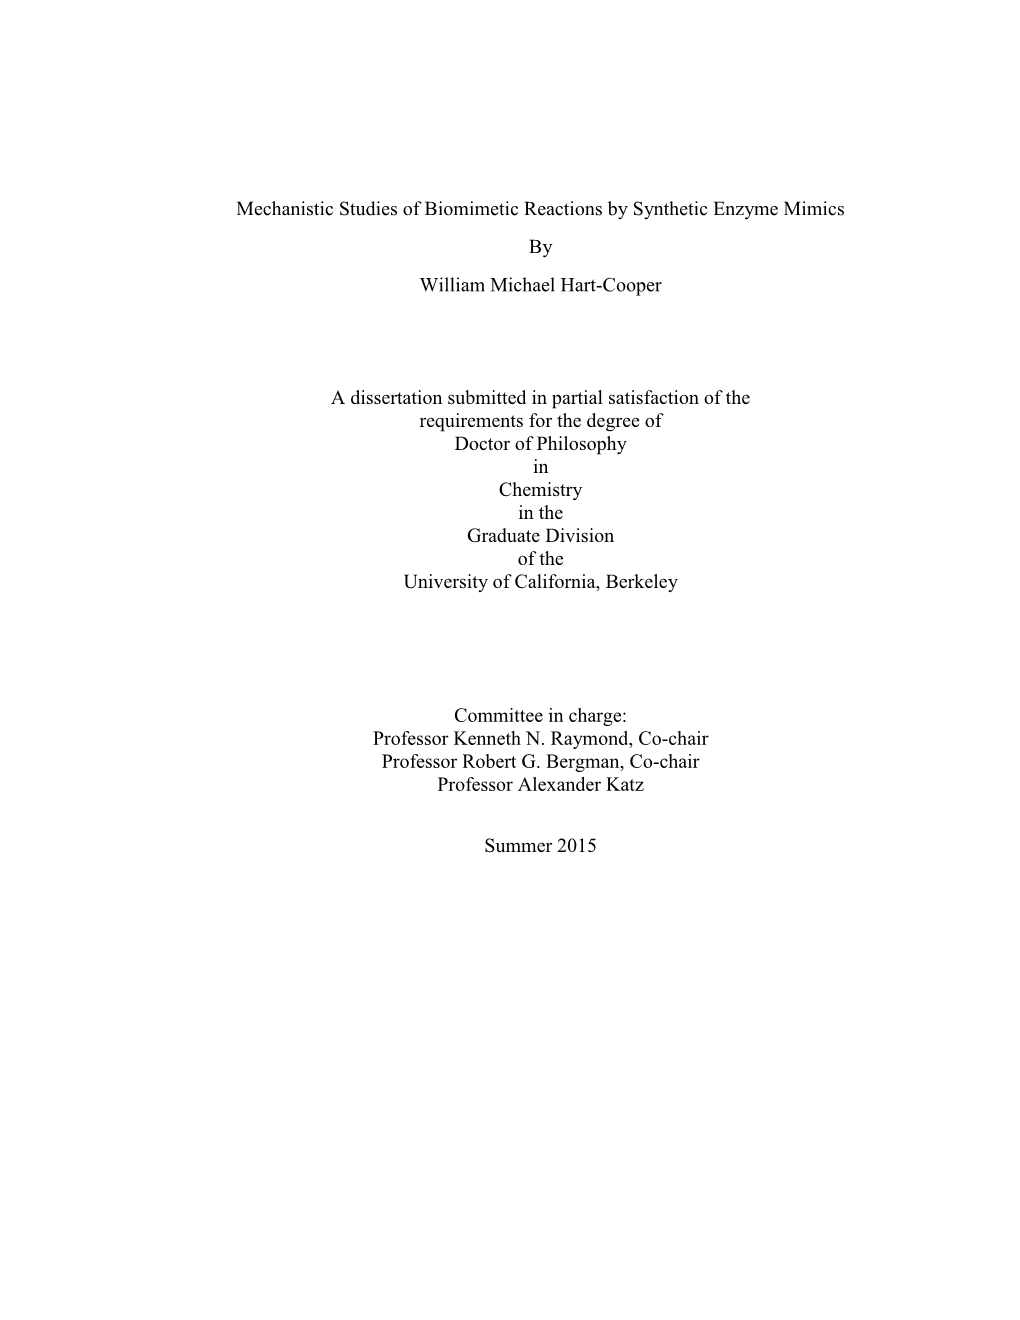 Mechanistic Studies of Biomimetic Reactions by Synthetic Enzyme Mimics by William Michael Hart-Cooper a Dissertation Submitted I